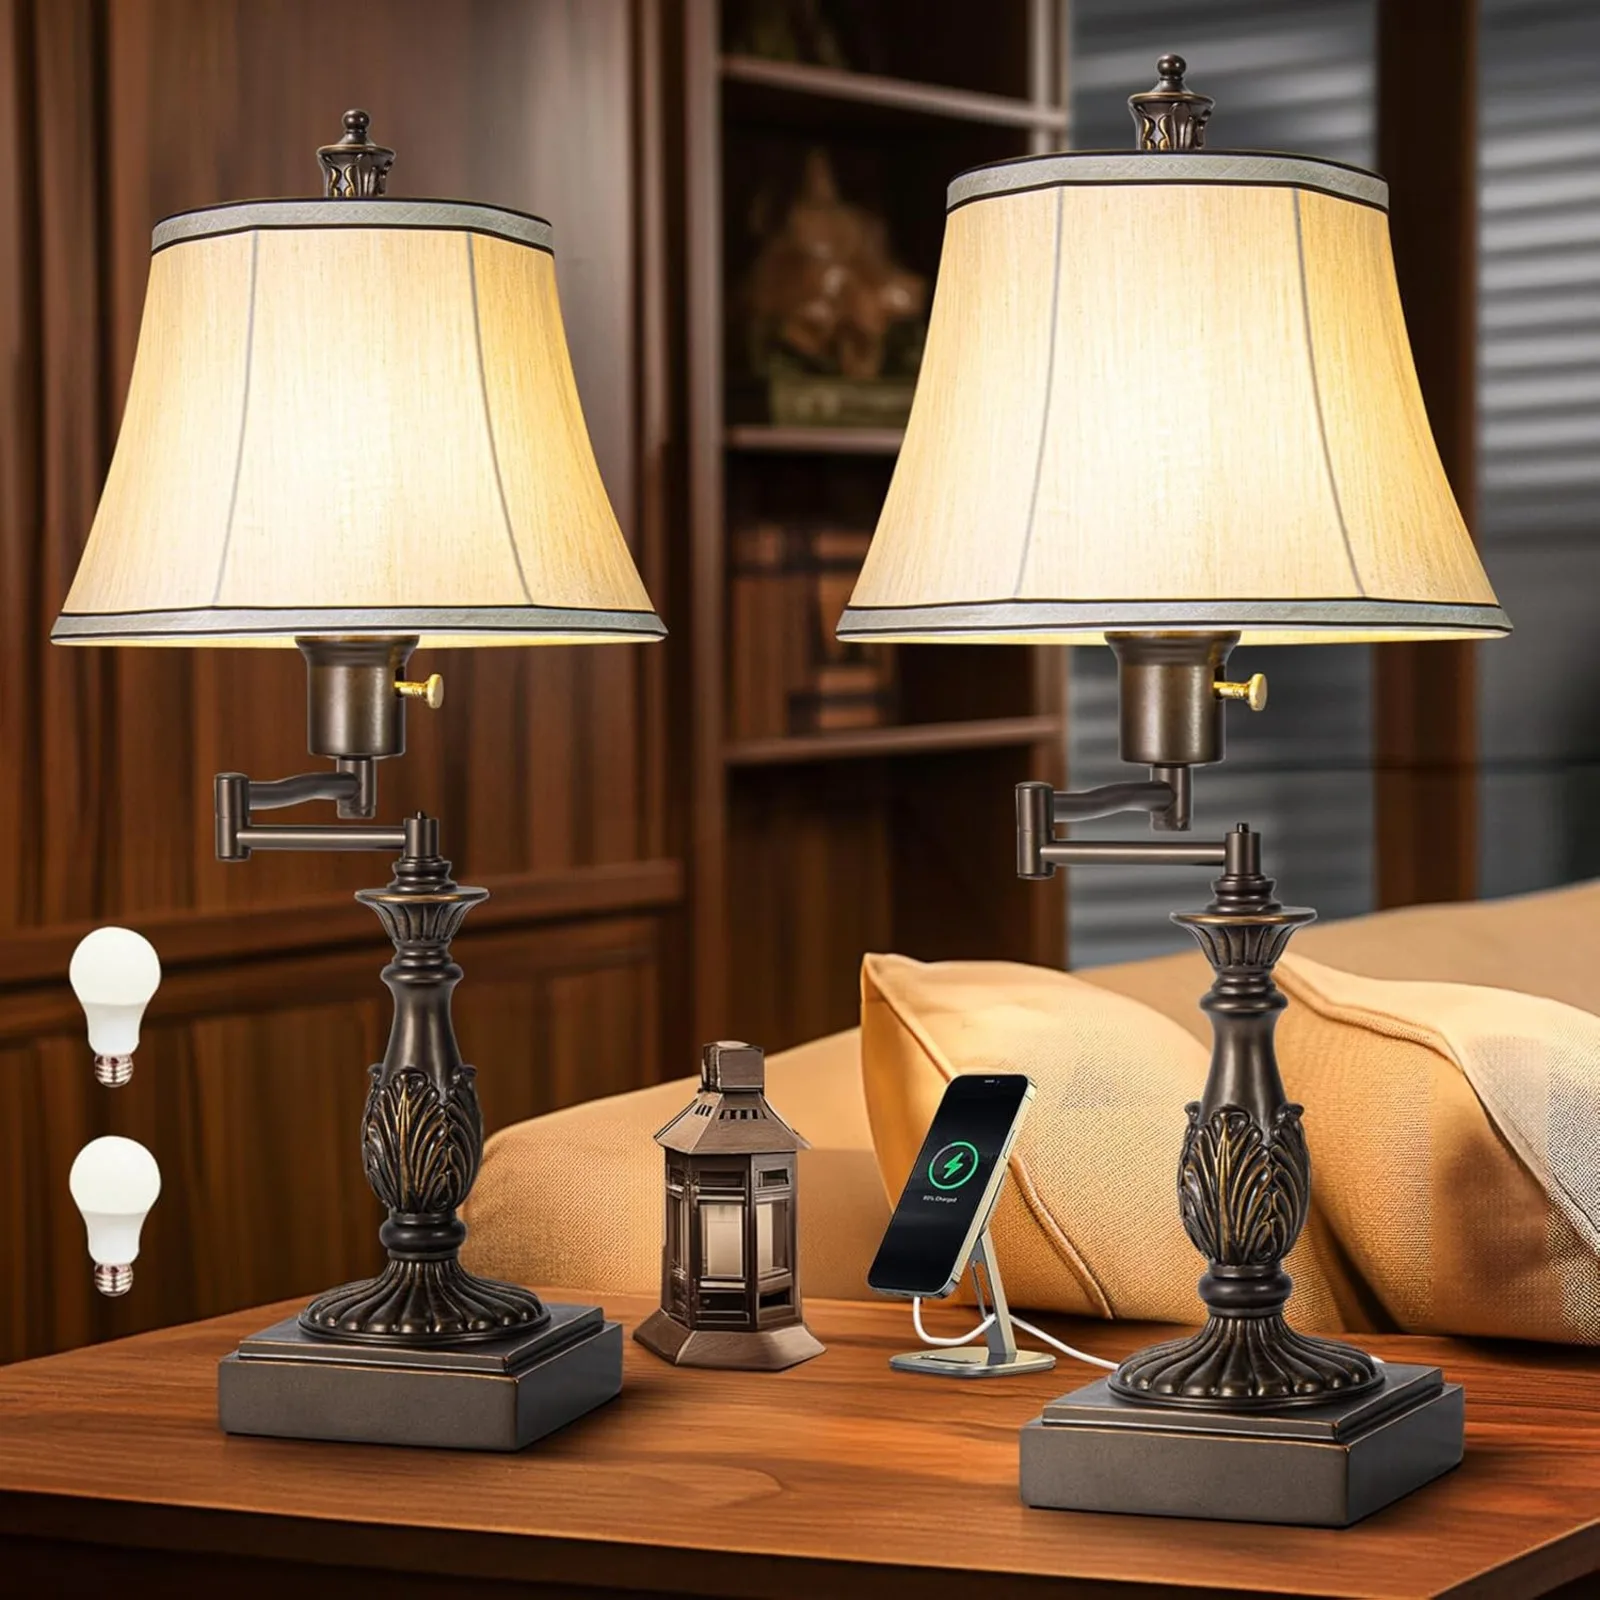 

US Rustic Traditional 350° Adjustable Swing Arm Table Lamp Set of 2 with USB A+C Ports Brown Finish Cream Shade Vintage